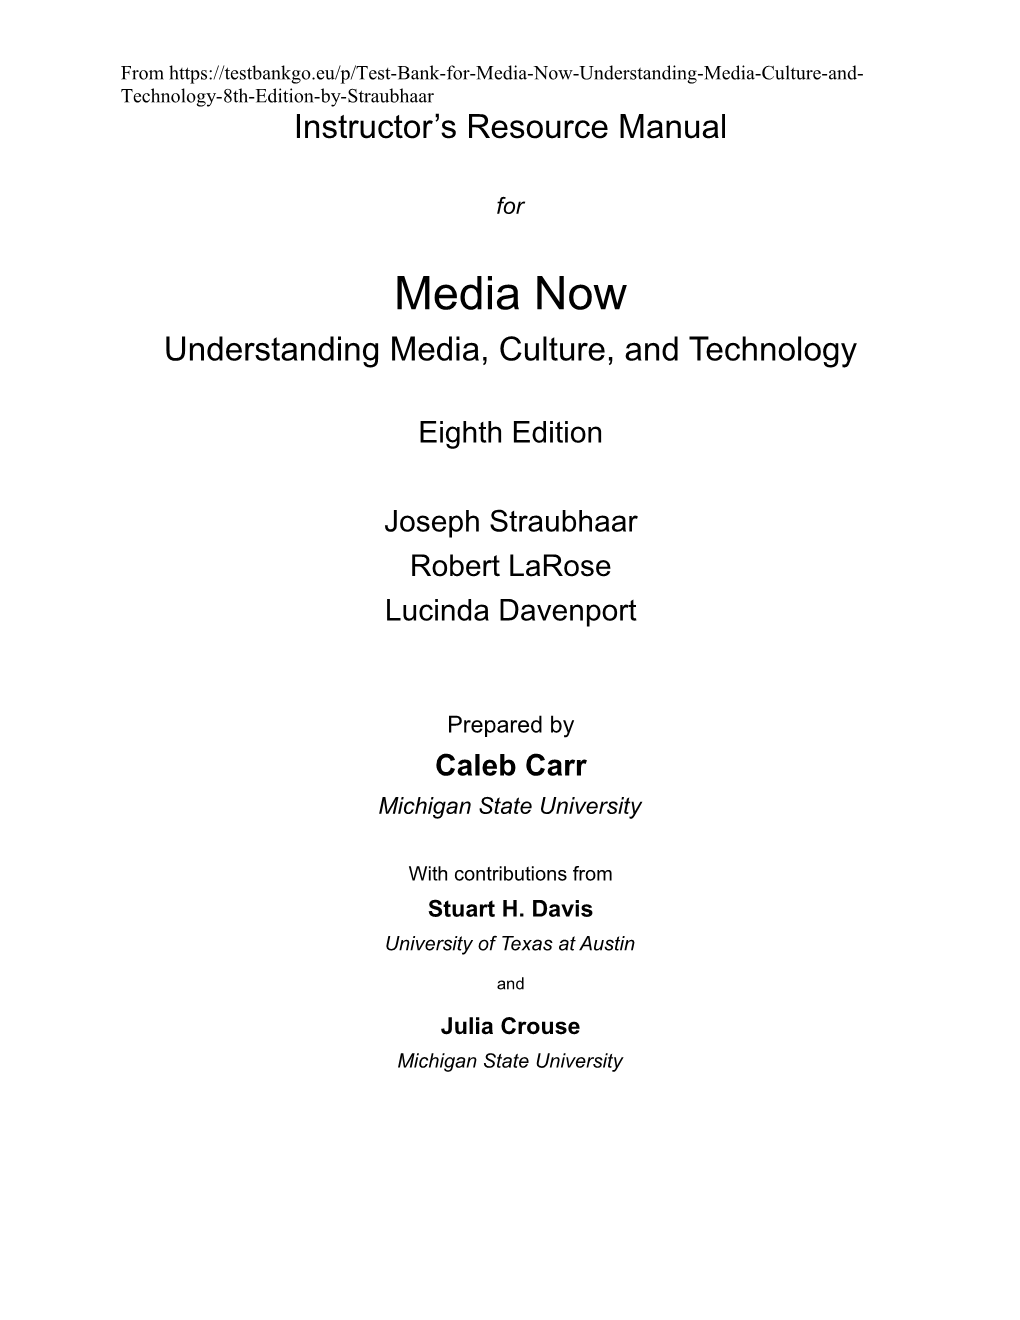 Understanding Media, Culture, and Technology